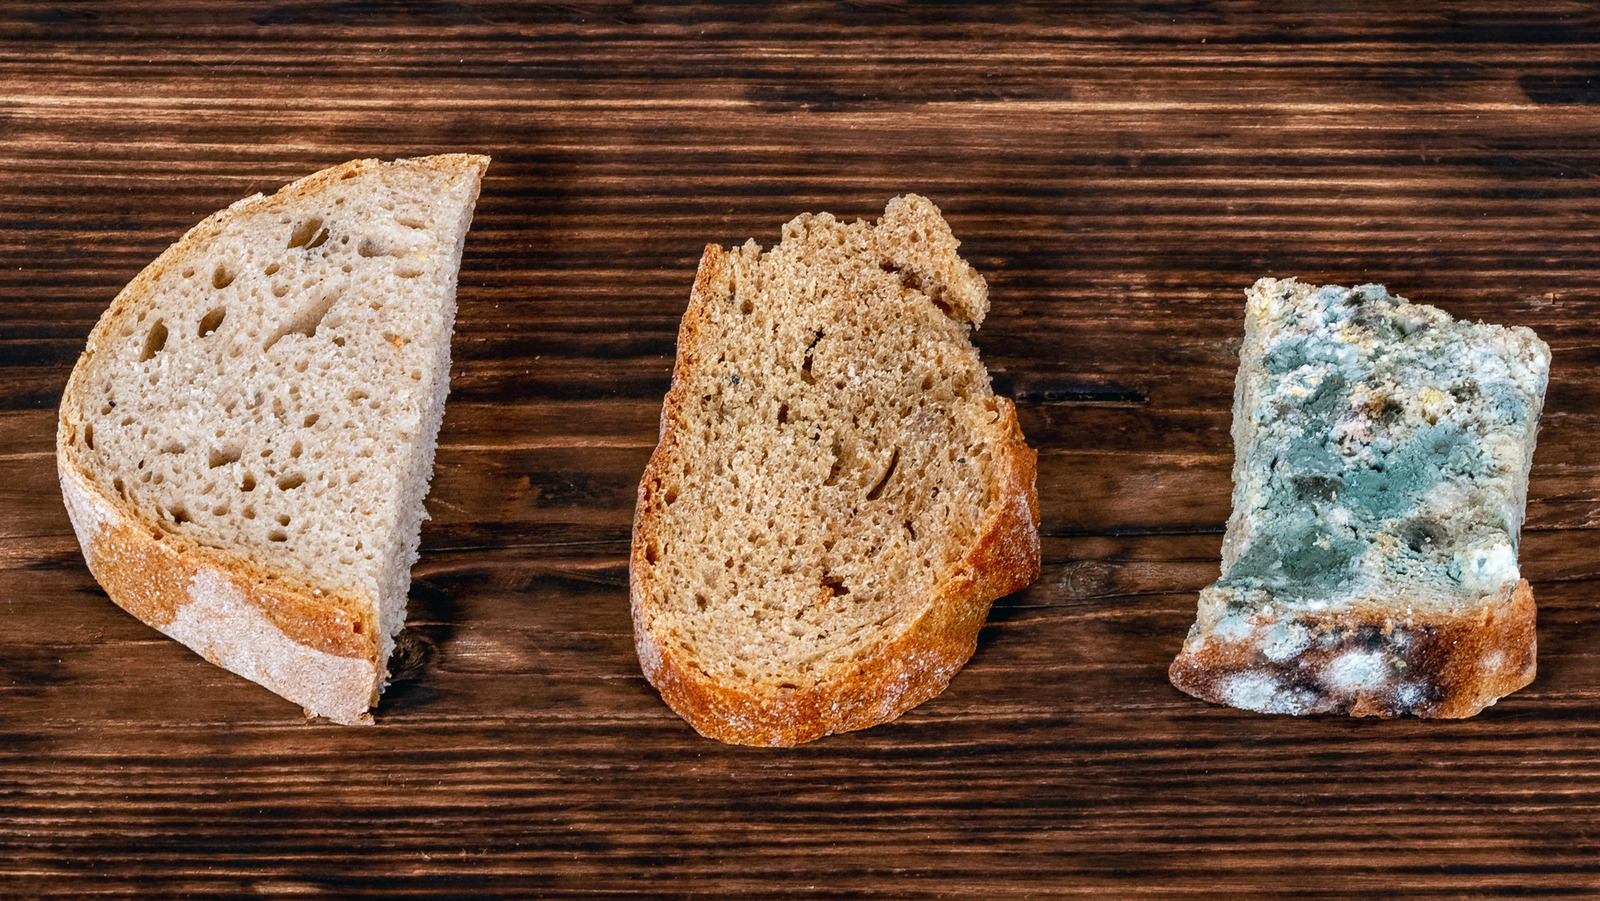 What Happens If You Eat Moldy Bread? Here's What You Should Know